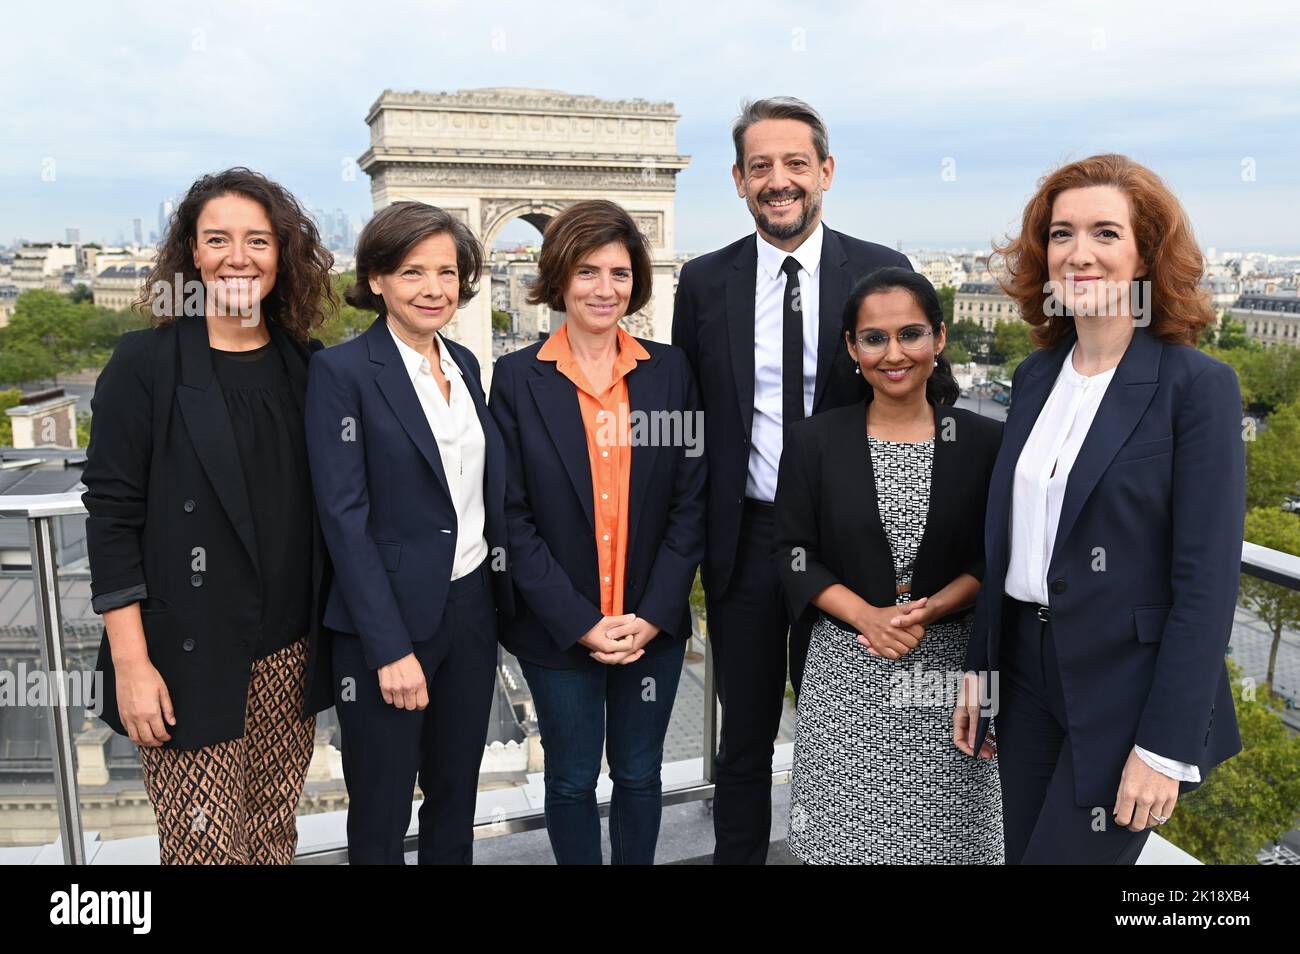 Souad Boutegrabet, CEO of Des Codeuses, Anne-Gabrielle Heilbronner, General Secretary of Publicis Groupe, Christel Heydemann, CEO of Orange, Jean-Marie Girodolle, Nupur Kohli, Dutch Founder and Director of NIIS Healthcare and Anne-Laure de Chammard, CEO of Energy Solutions International, ENGIE, at the Women's Forum Rising Talents event in Paris, France on September 16, 2022. Photo by Laurent Zabulon/ABACAPRESS.COM Stock Photo